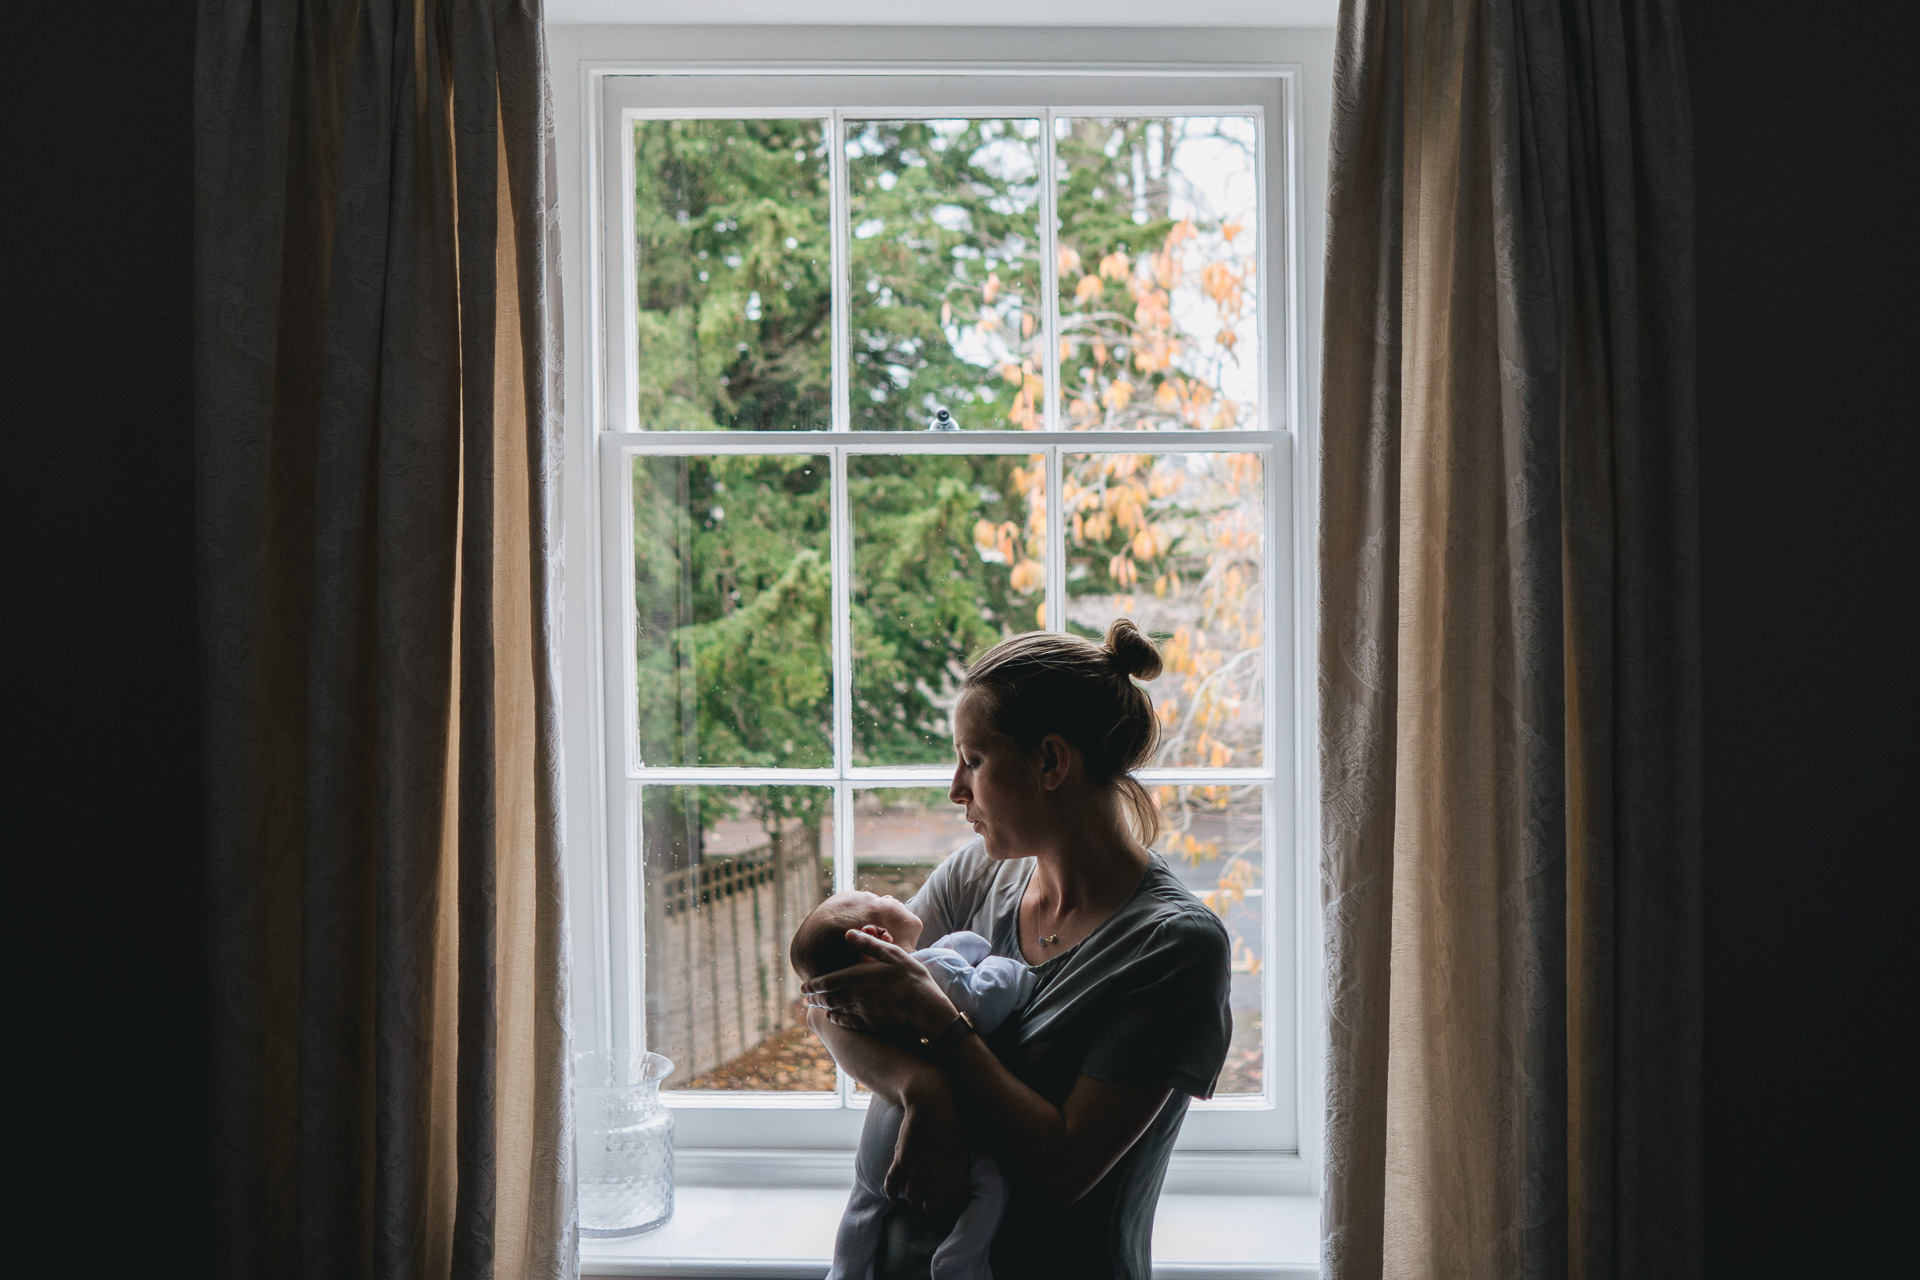 A mother with a newborn baby in front of a window